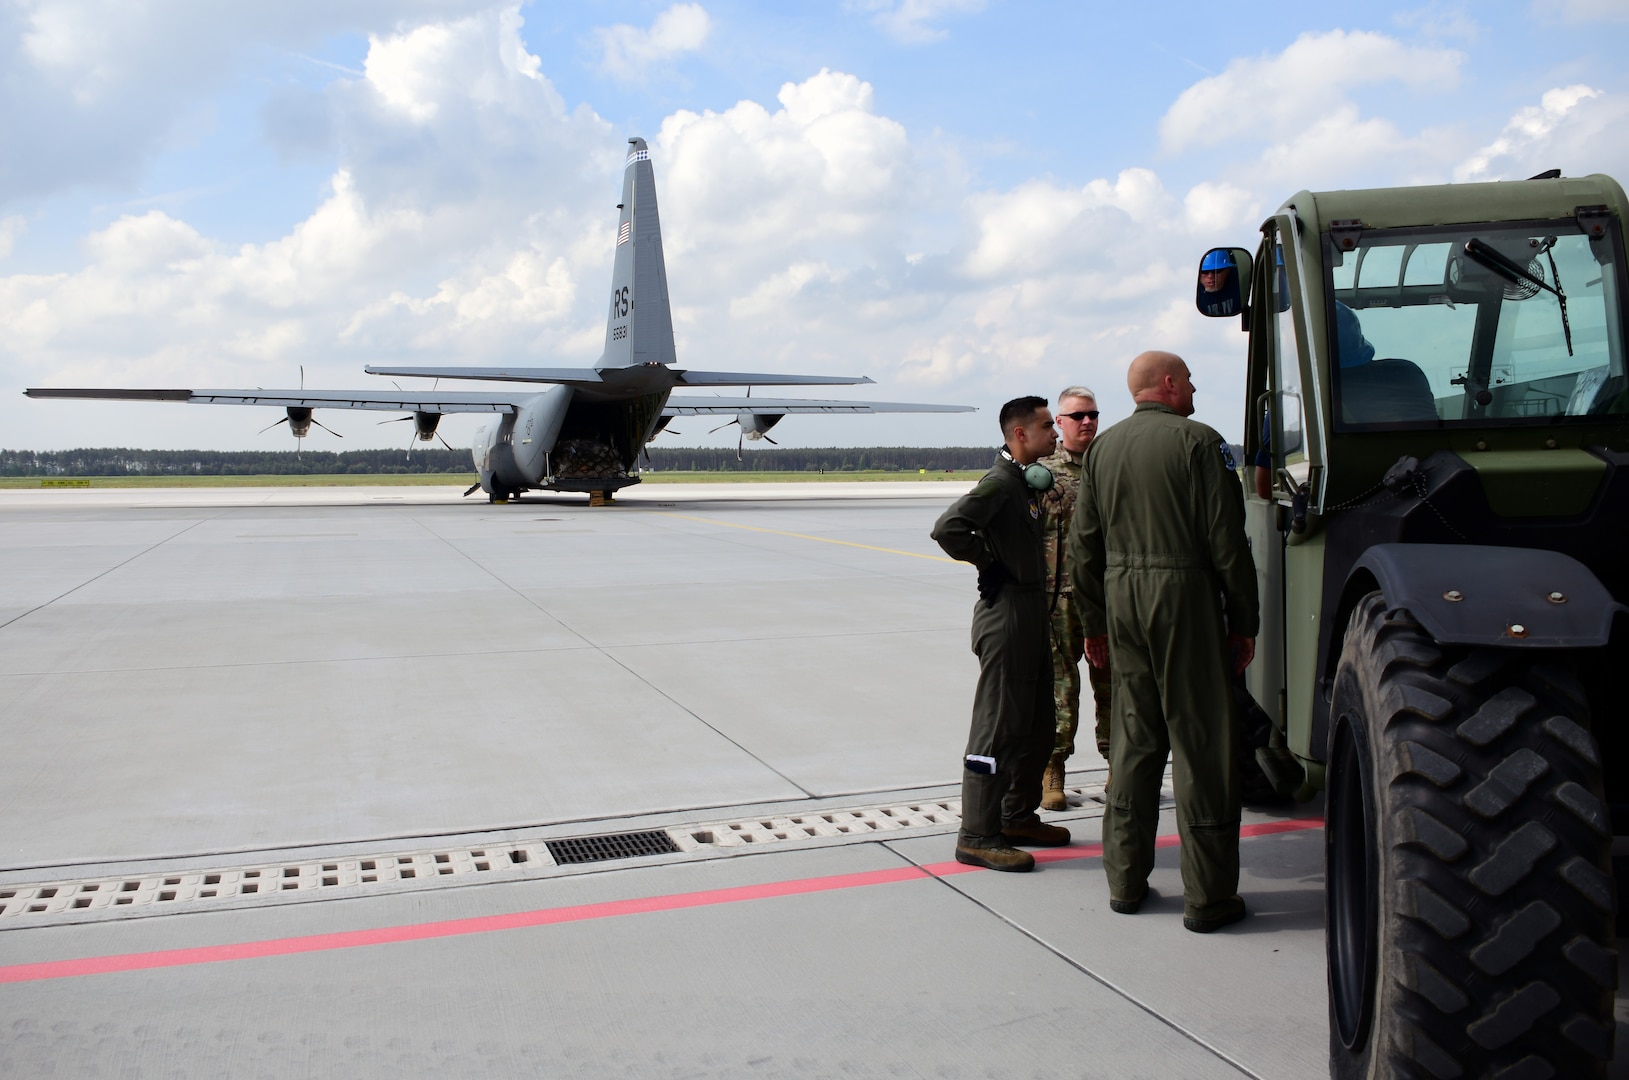 DDXX team members prepare to offload a pallet from an Air Force C-130 on the flight line in Powidz, Poland.